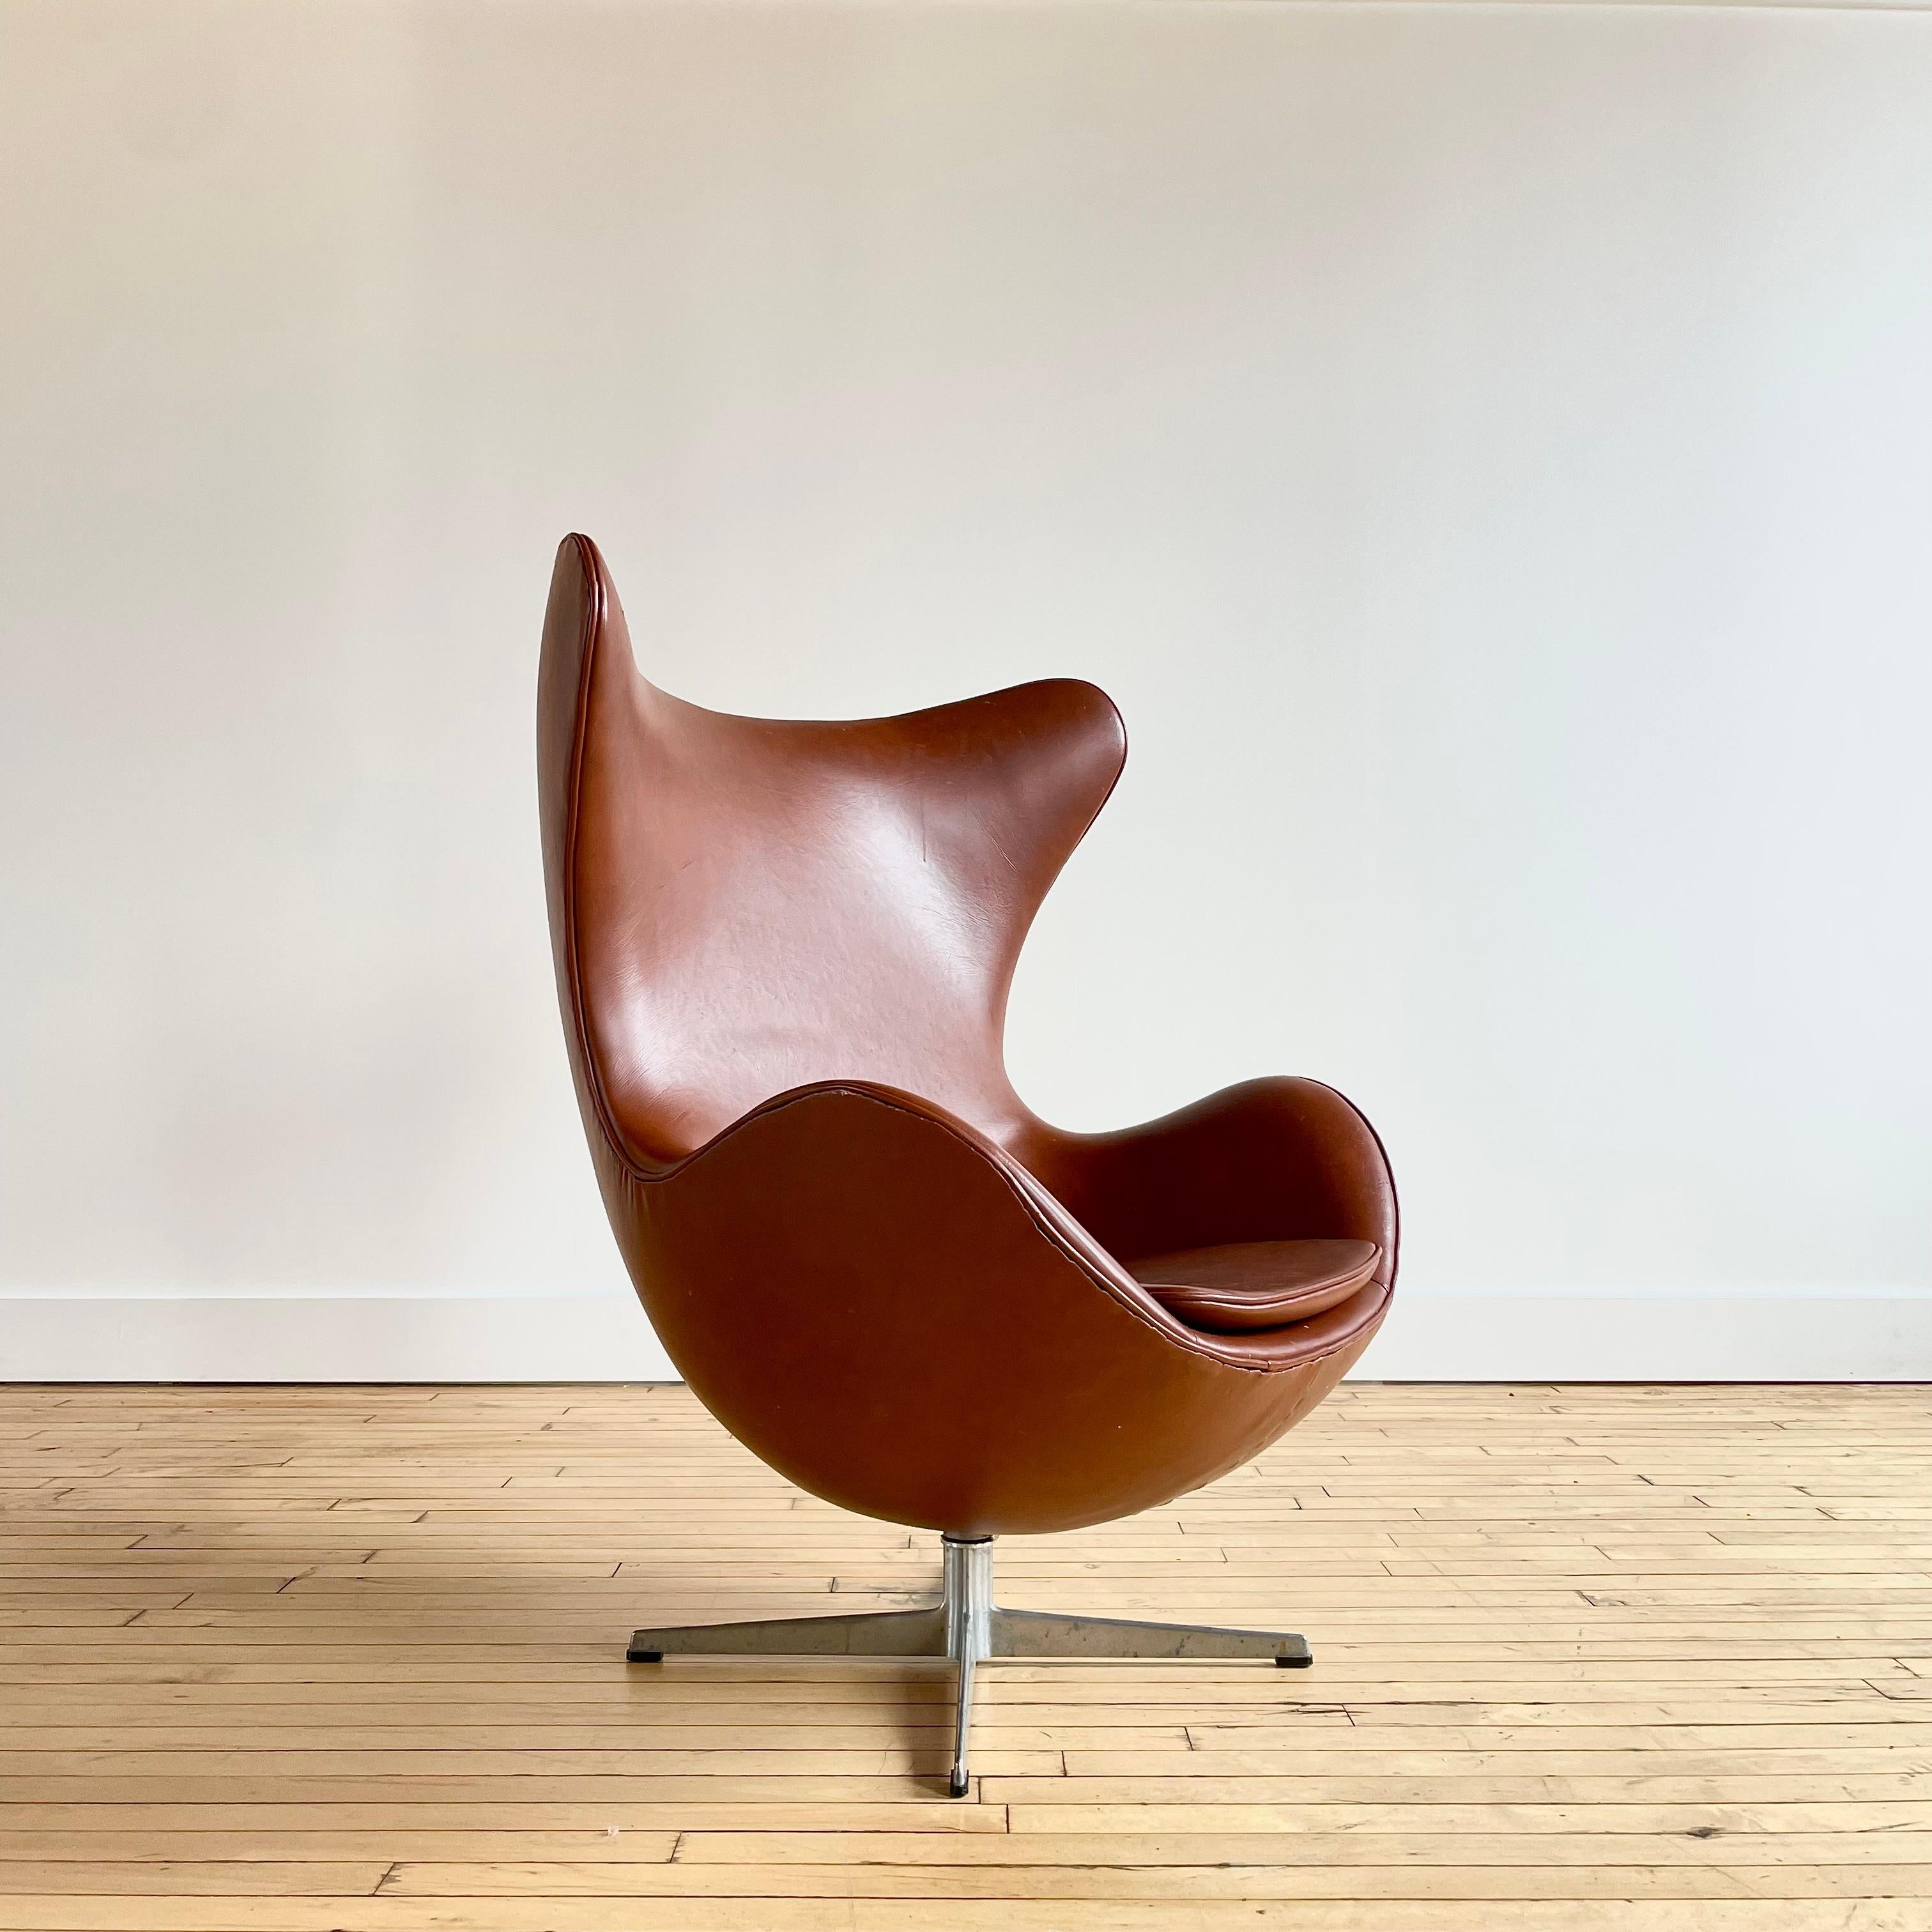 Authentic early example of the iconic Egg Chair by Arne Jacobsen. Fritz Hansen signature is etched into the base. 

This chair features cognac upholstery in what appears to be fake leather or vinyl. I am not sure if this is the original upholstery.